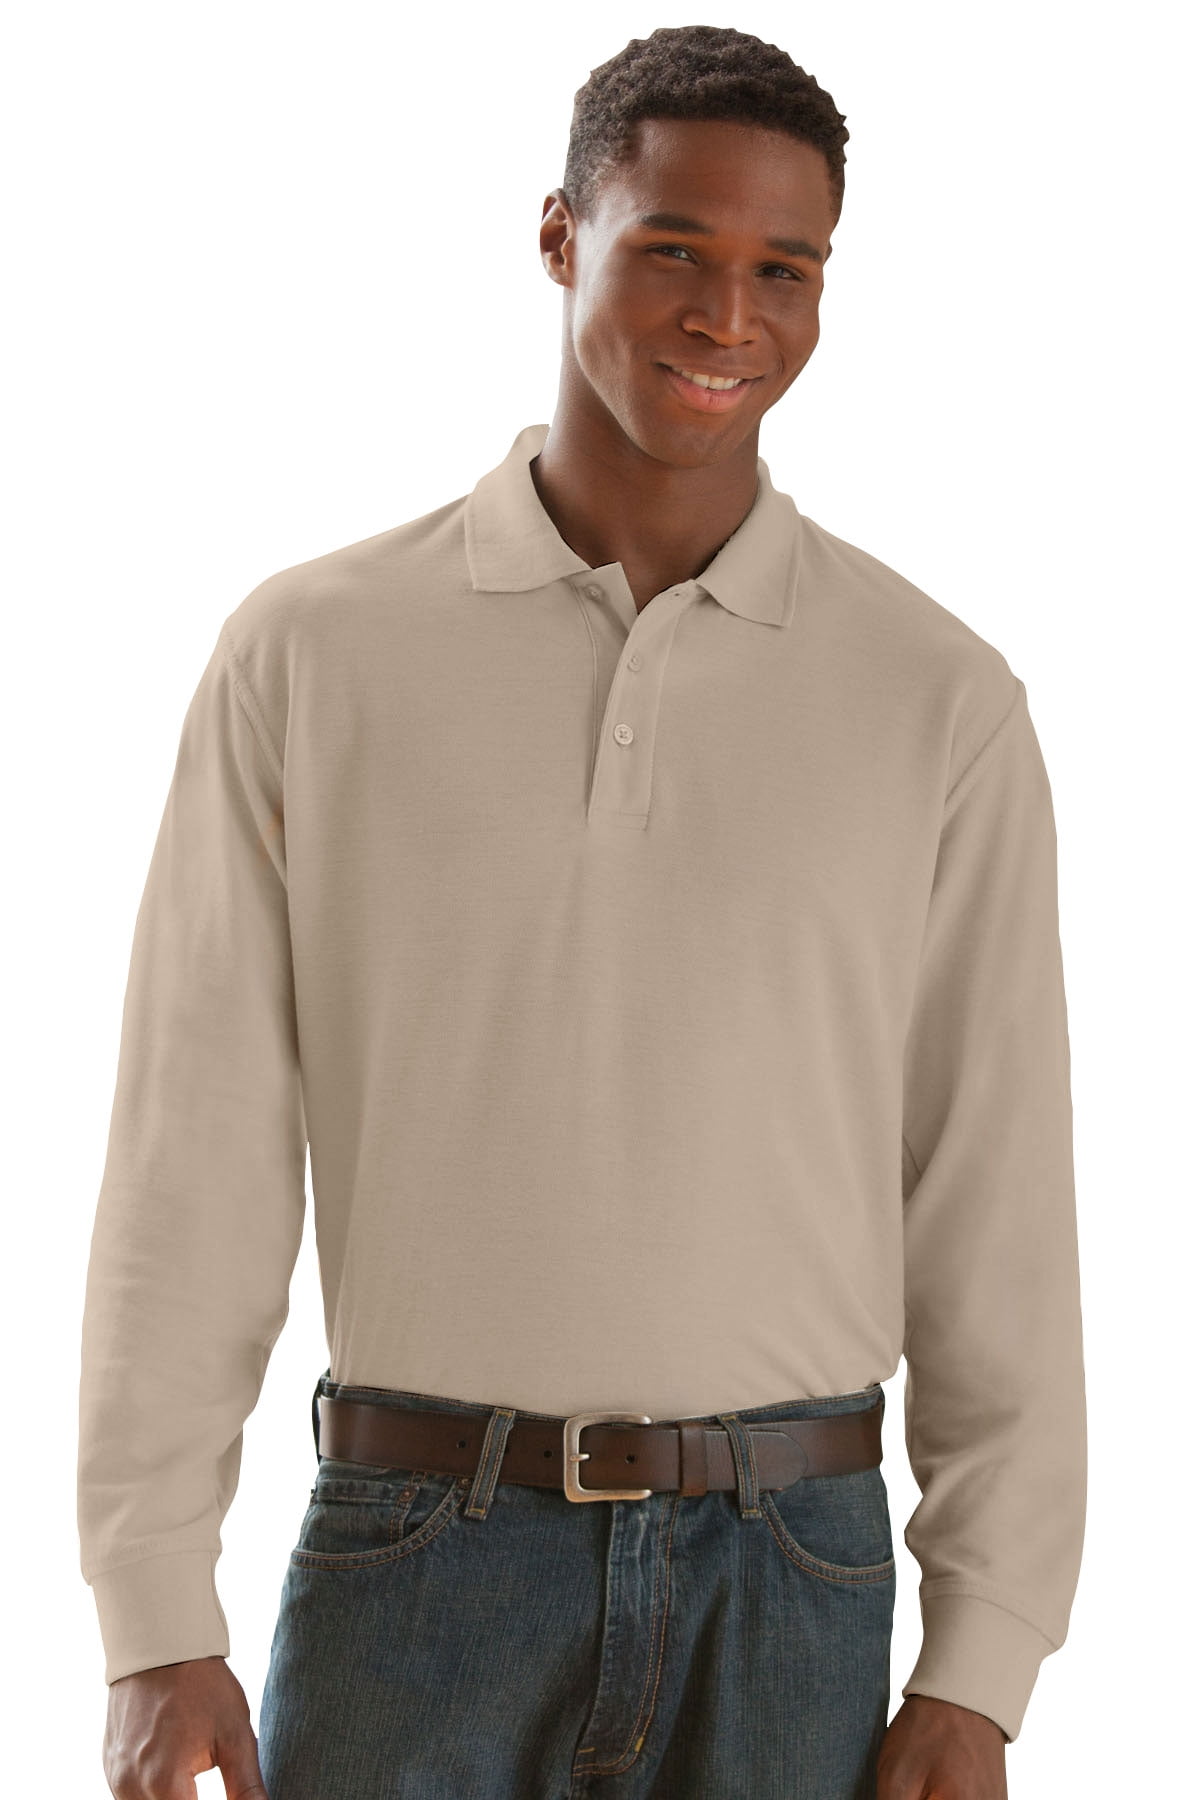 Long Sleeve Soft-Blend Double-Tuck Pique Polo Shirt - Display Pros